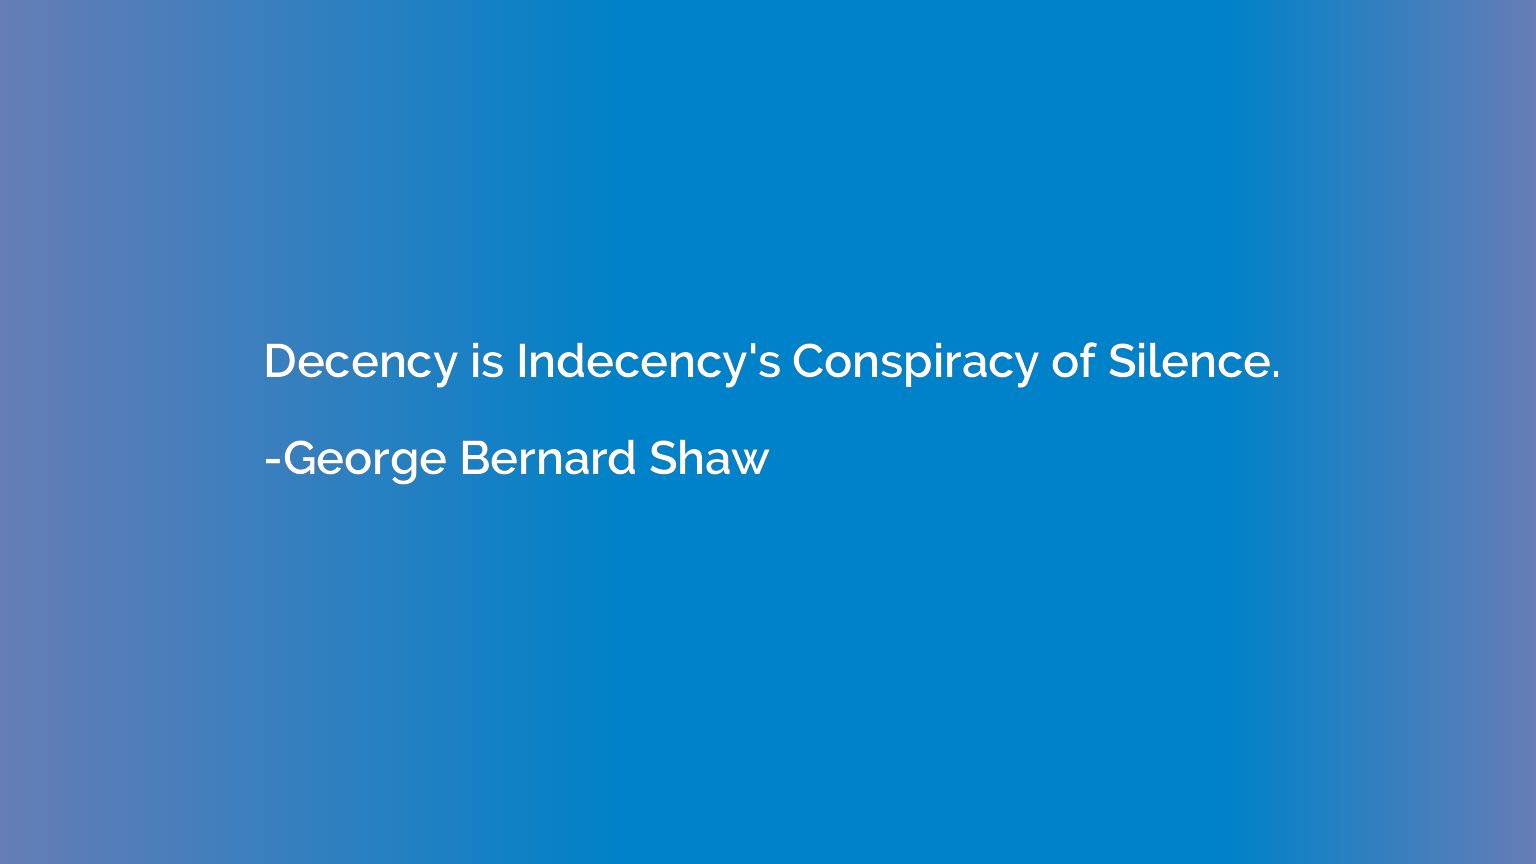 Decency is Indecency's Conspiracy of Silence.